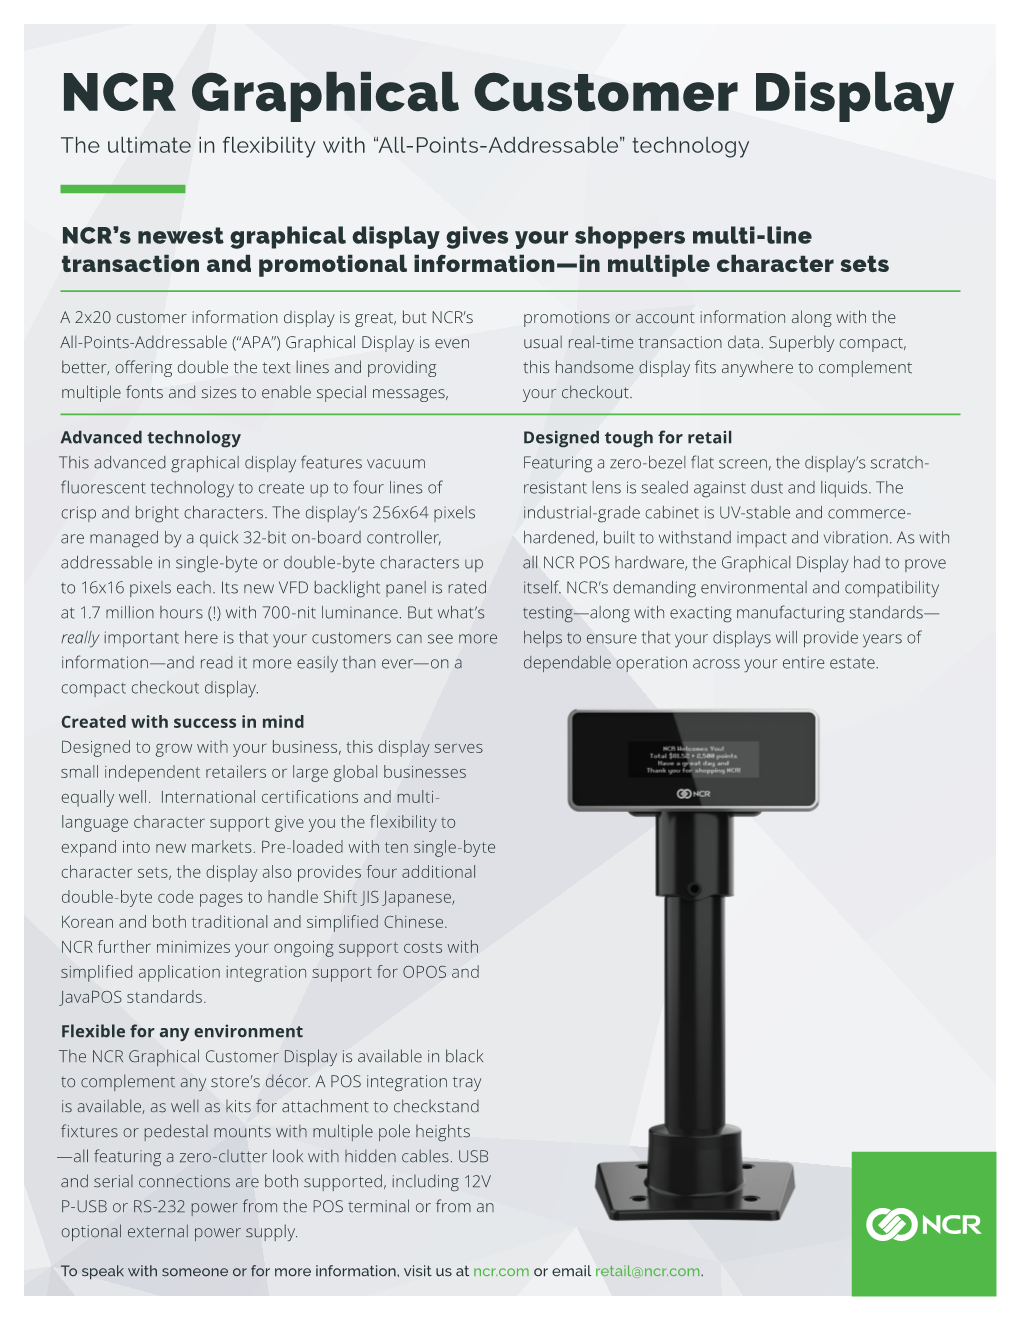 NCR Graphical Customer Display the Ultimate in Flexibility with “All-Points-Addressable” Technology